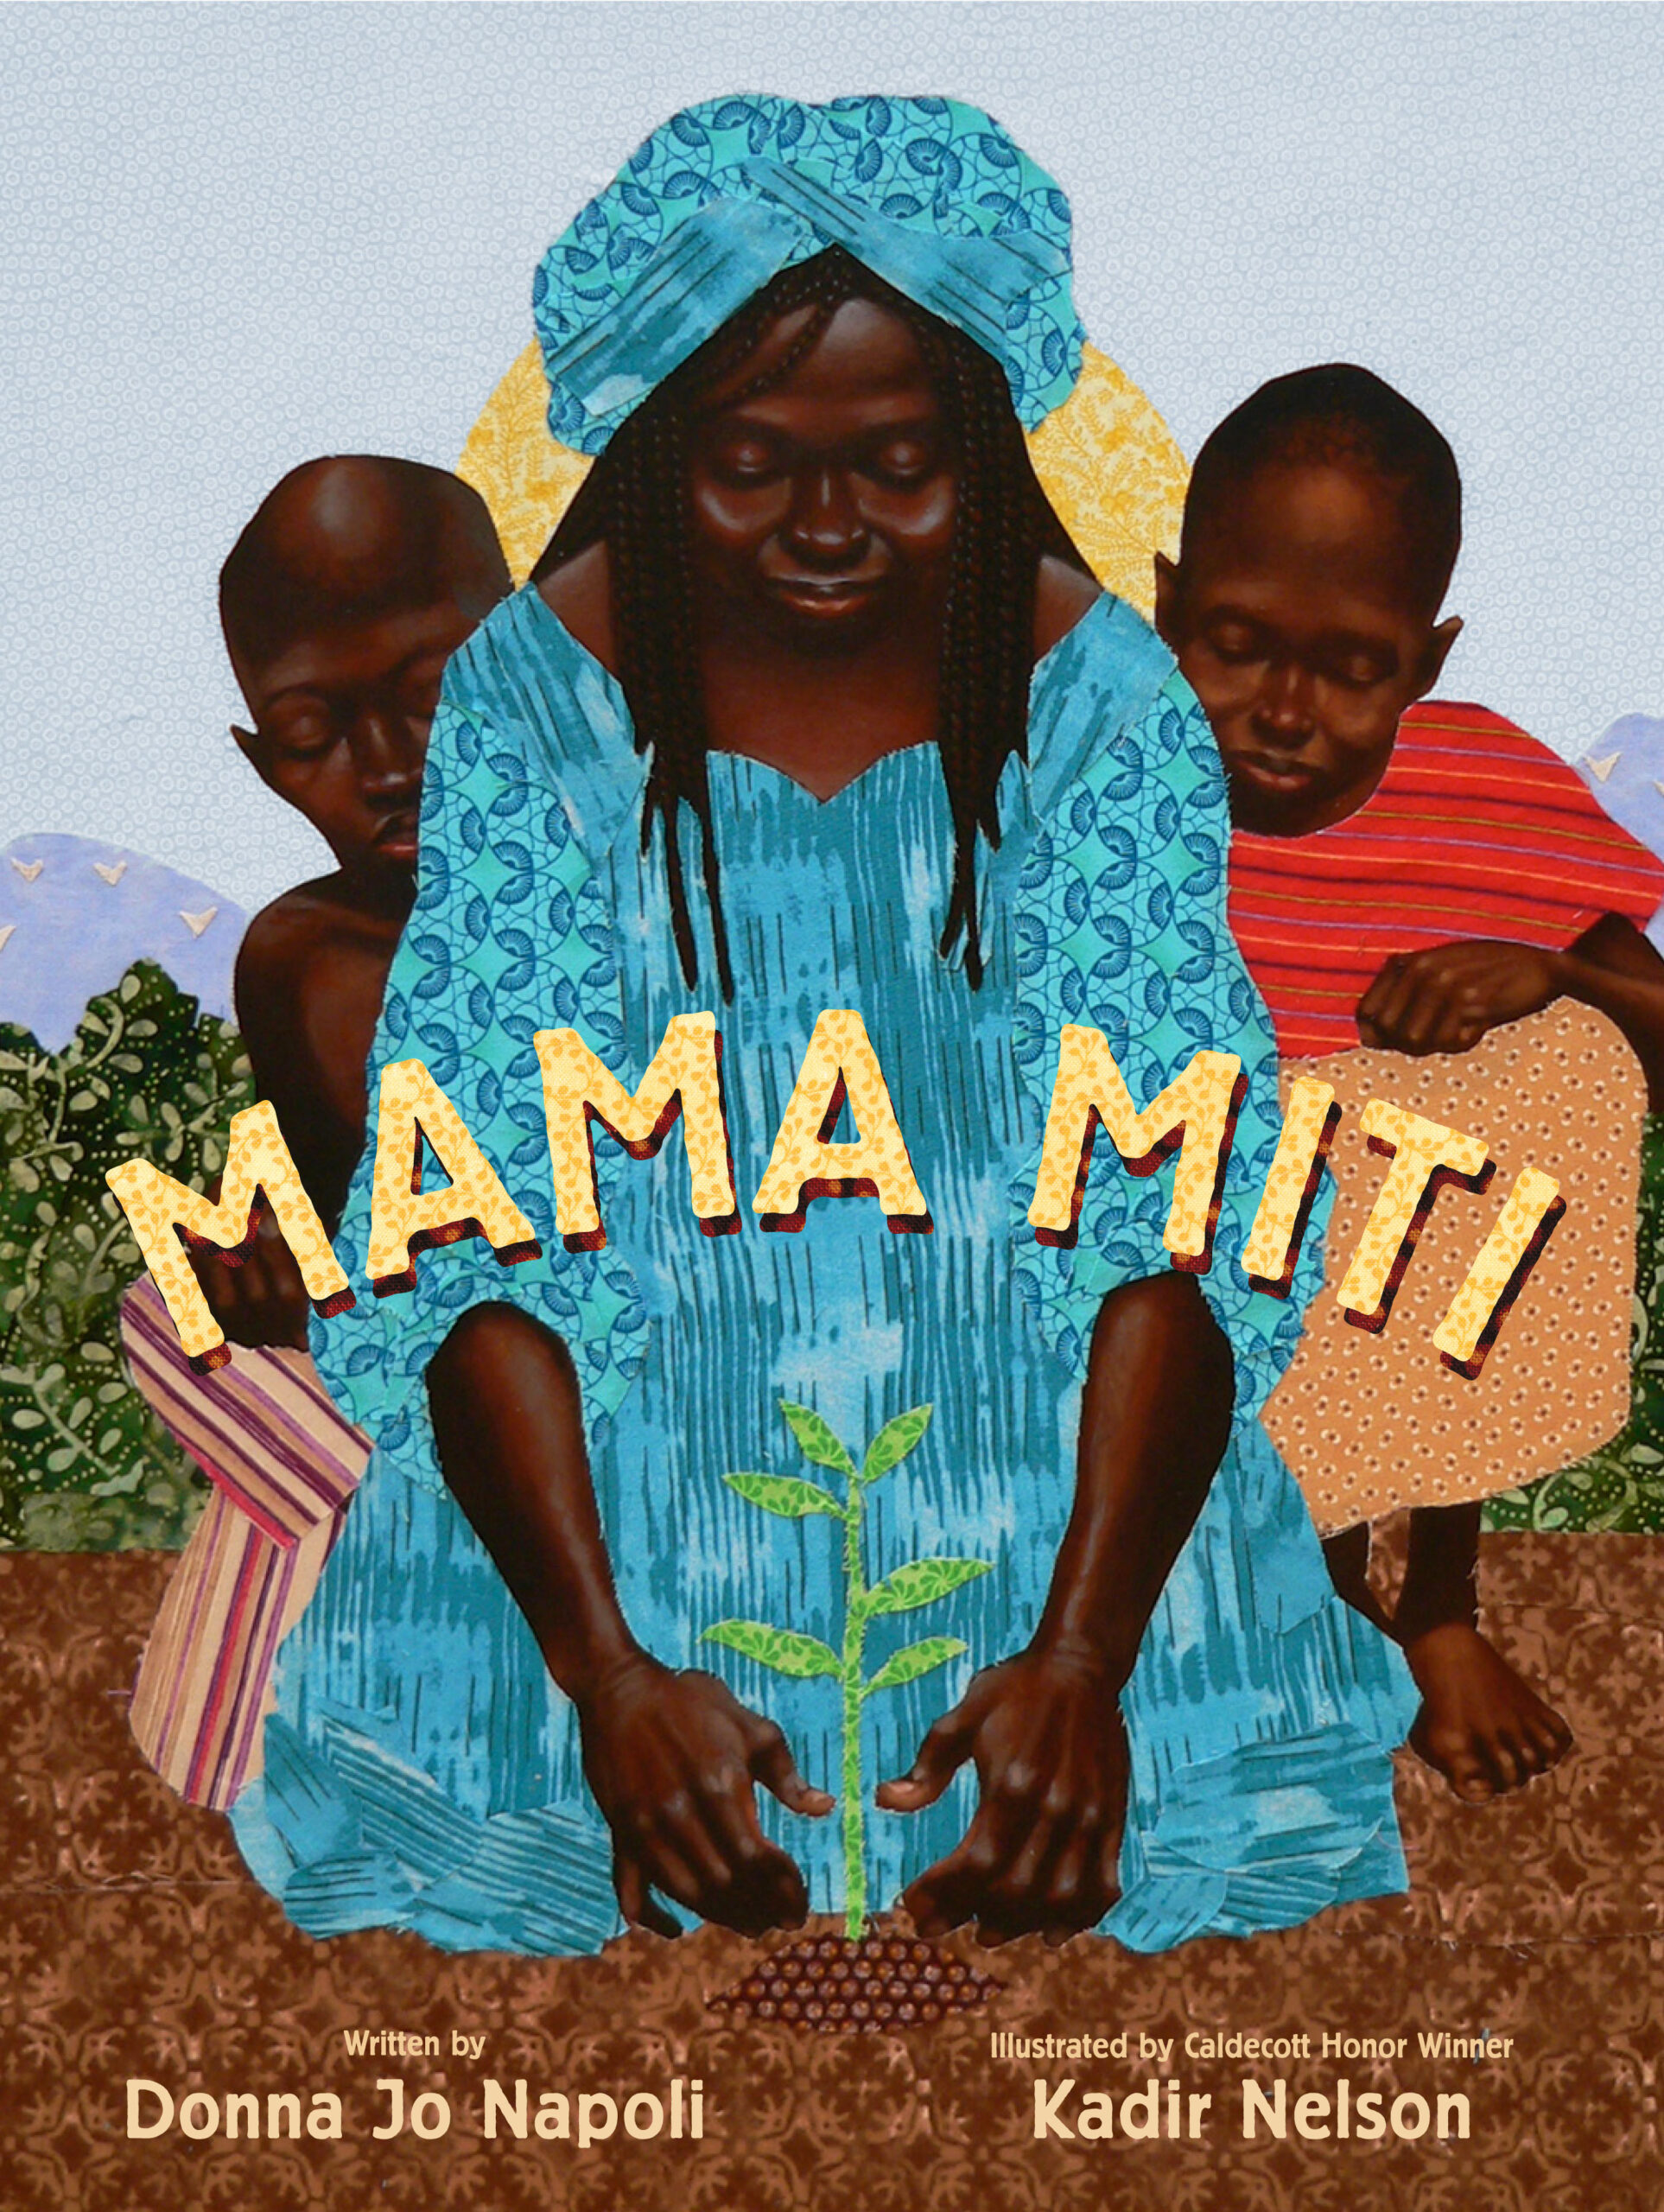 Cover of the book Mama Miti: Wangari Maathai and the Trees of Kenya. Features Wangari Maathai dressed in blue in the foreground with two students positioned behind her and to either side. Wangari is planting a tree.